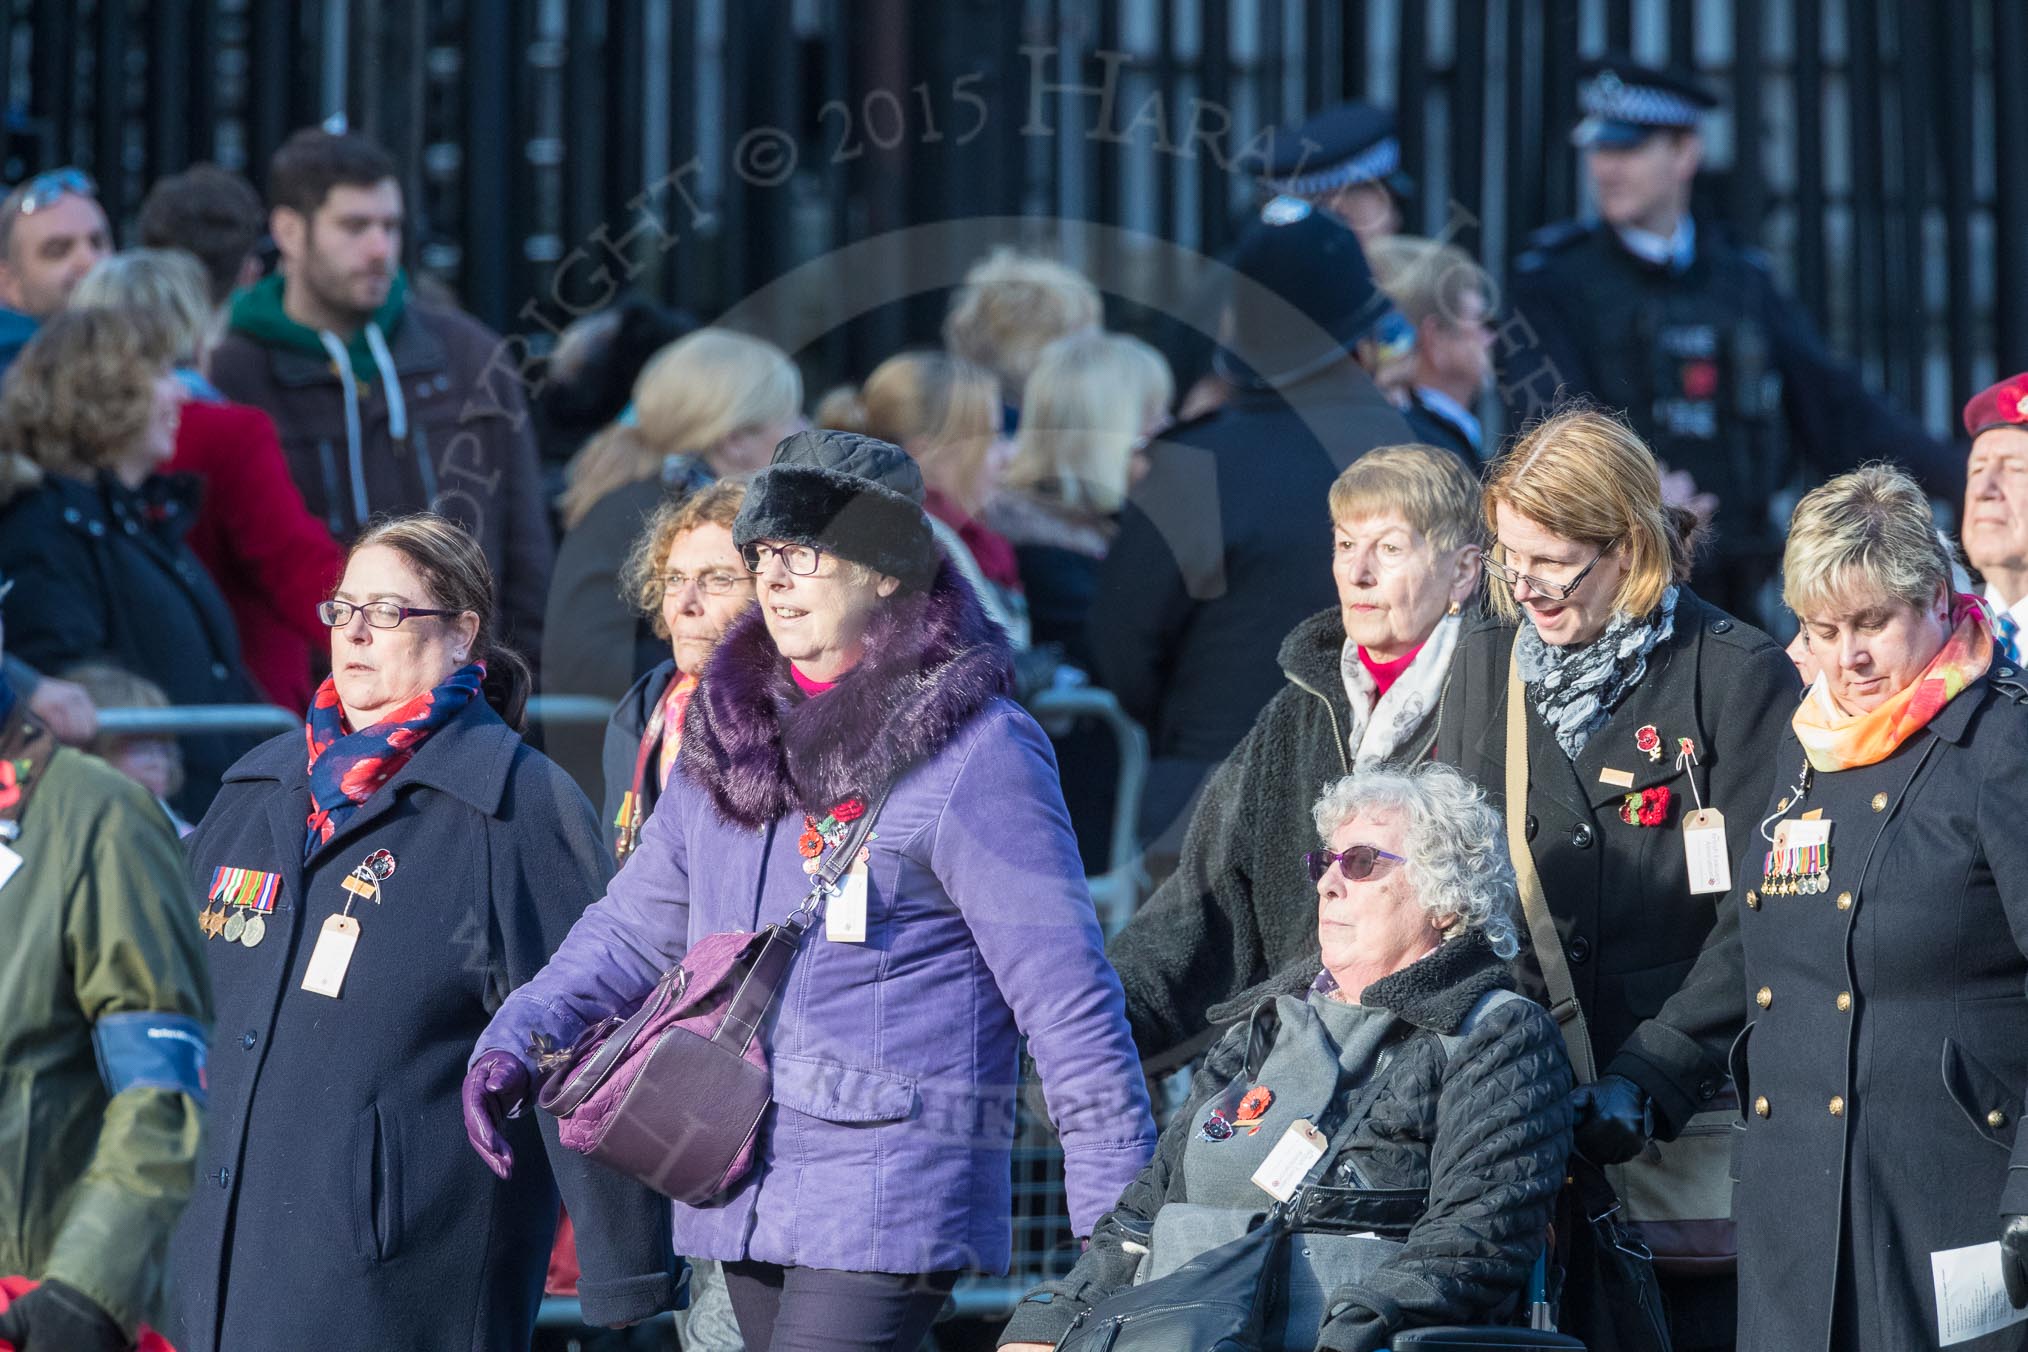 March Past, Remembrance Sunday at the Cenotaph 2016: M49 The British Evacuees Association.
Cenotaph, Whitehall, London SW1,
London,
Greater London,
United Kingdom,
on 13 November 2016 at 13:20, image #3011